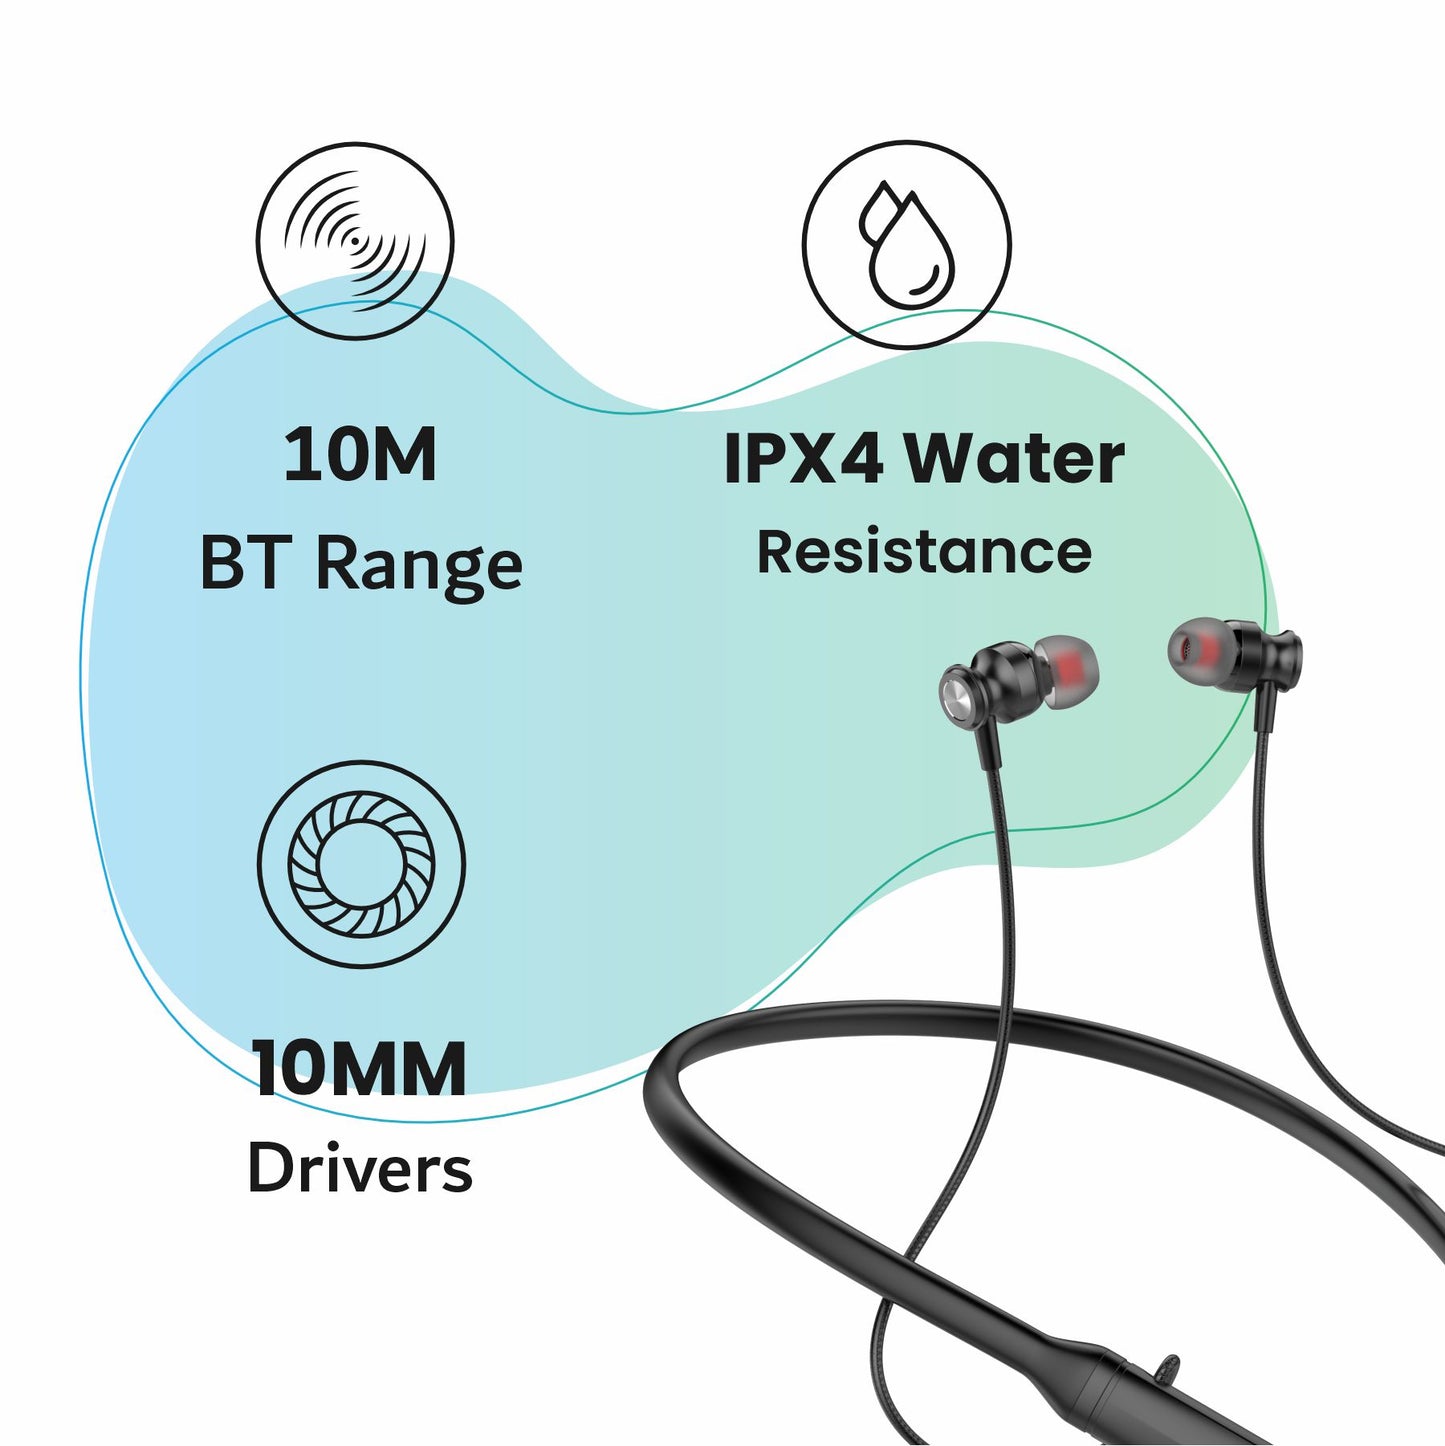 LYNE Rover 17 40 Hours Music Time Wireless Neckband with IPX4 Water Resistance, Magnetic Earbuds & Mic